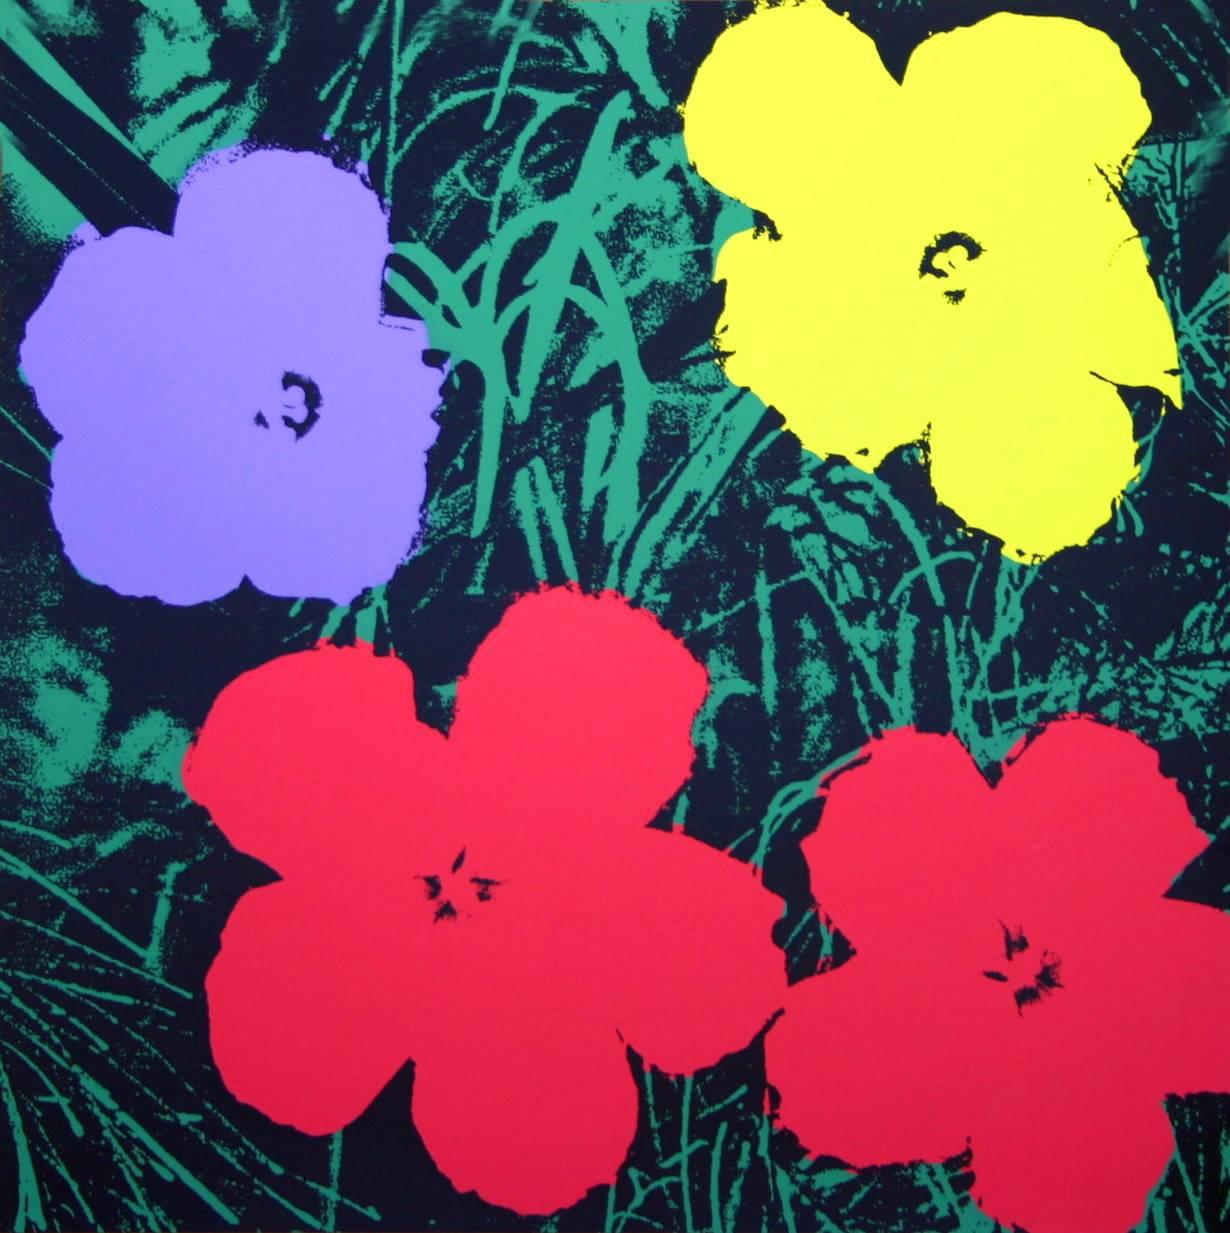 After Andy Warhol
Flowers Screen Print Published by Sunday B. Morning in 2011 using original screens obtained from Andy Warhol in the early 70's

Medium: Silkscreen in colors printed on archival museum board

Dimensions: 36 x 36 inches (full